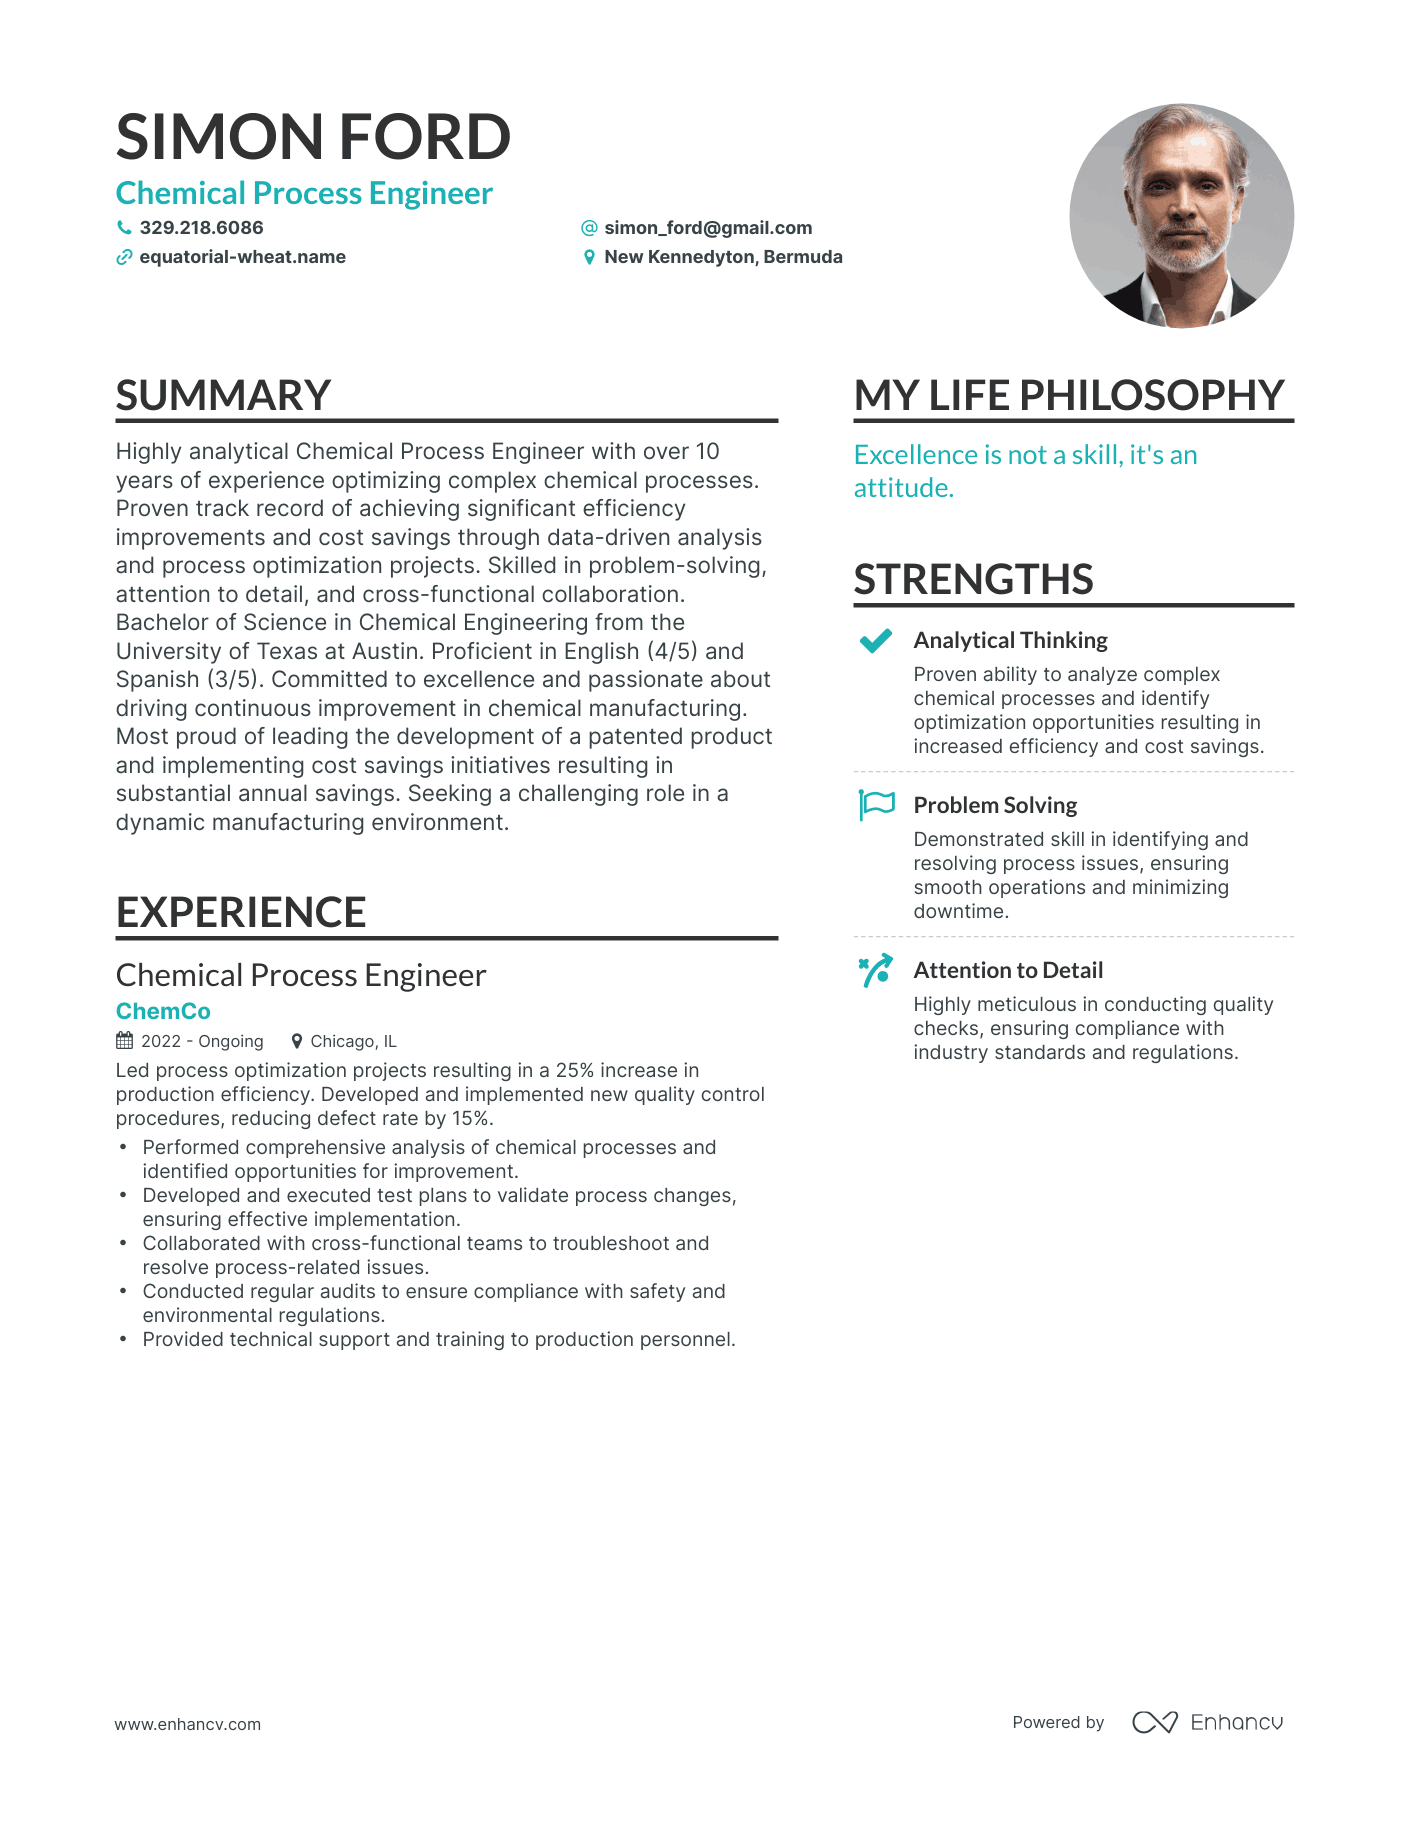 Chemical Process Engineer resume example